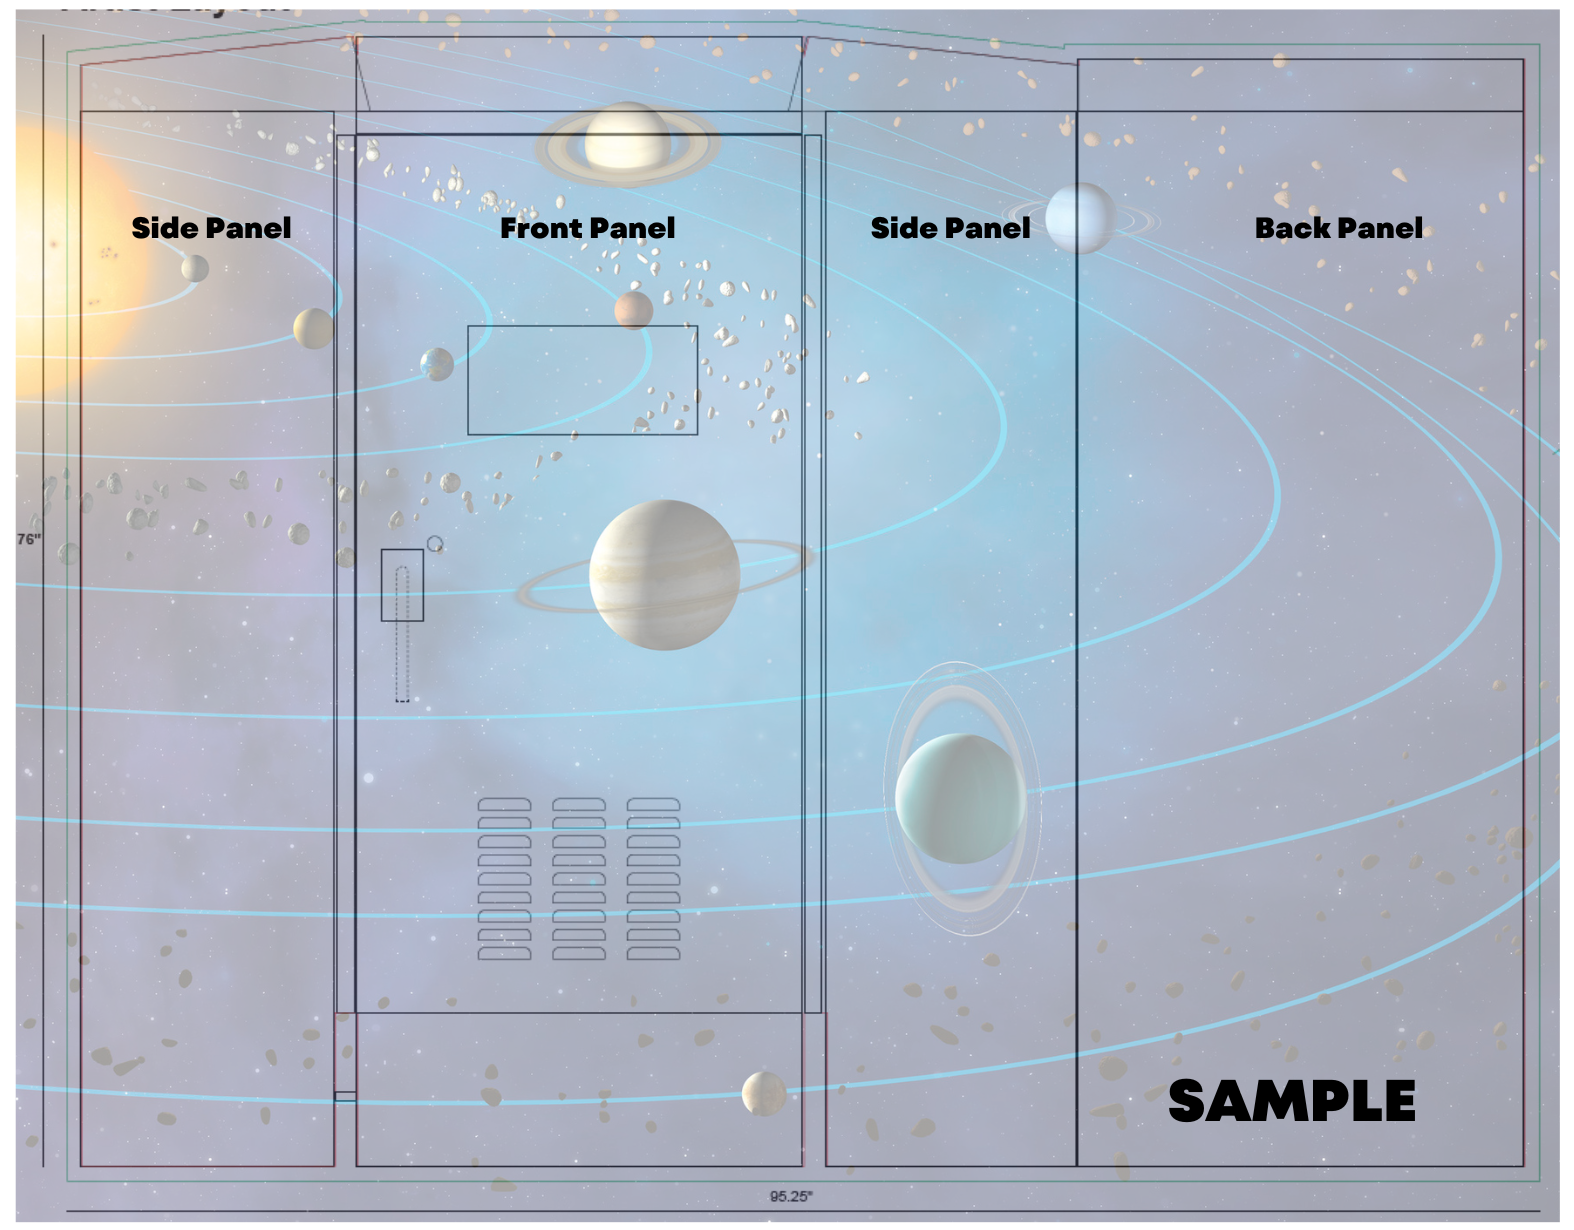 An overlay of the solar system on a template of a utility box